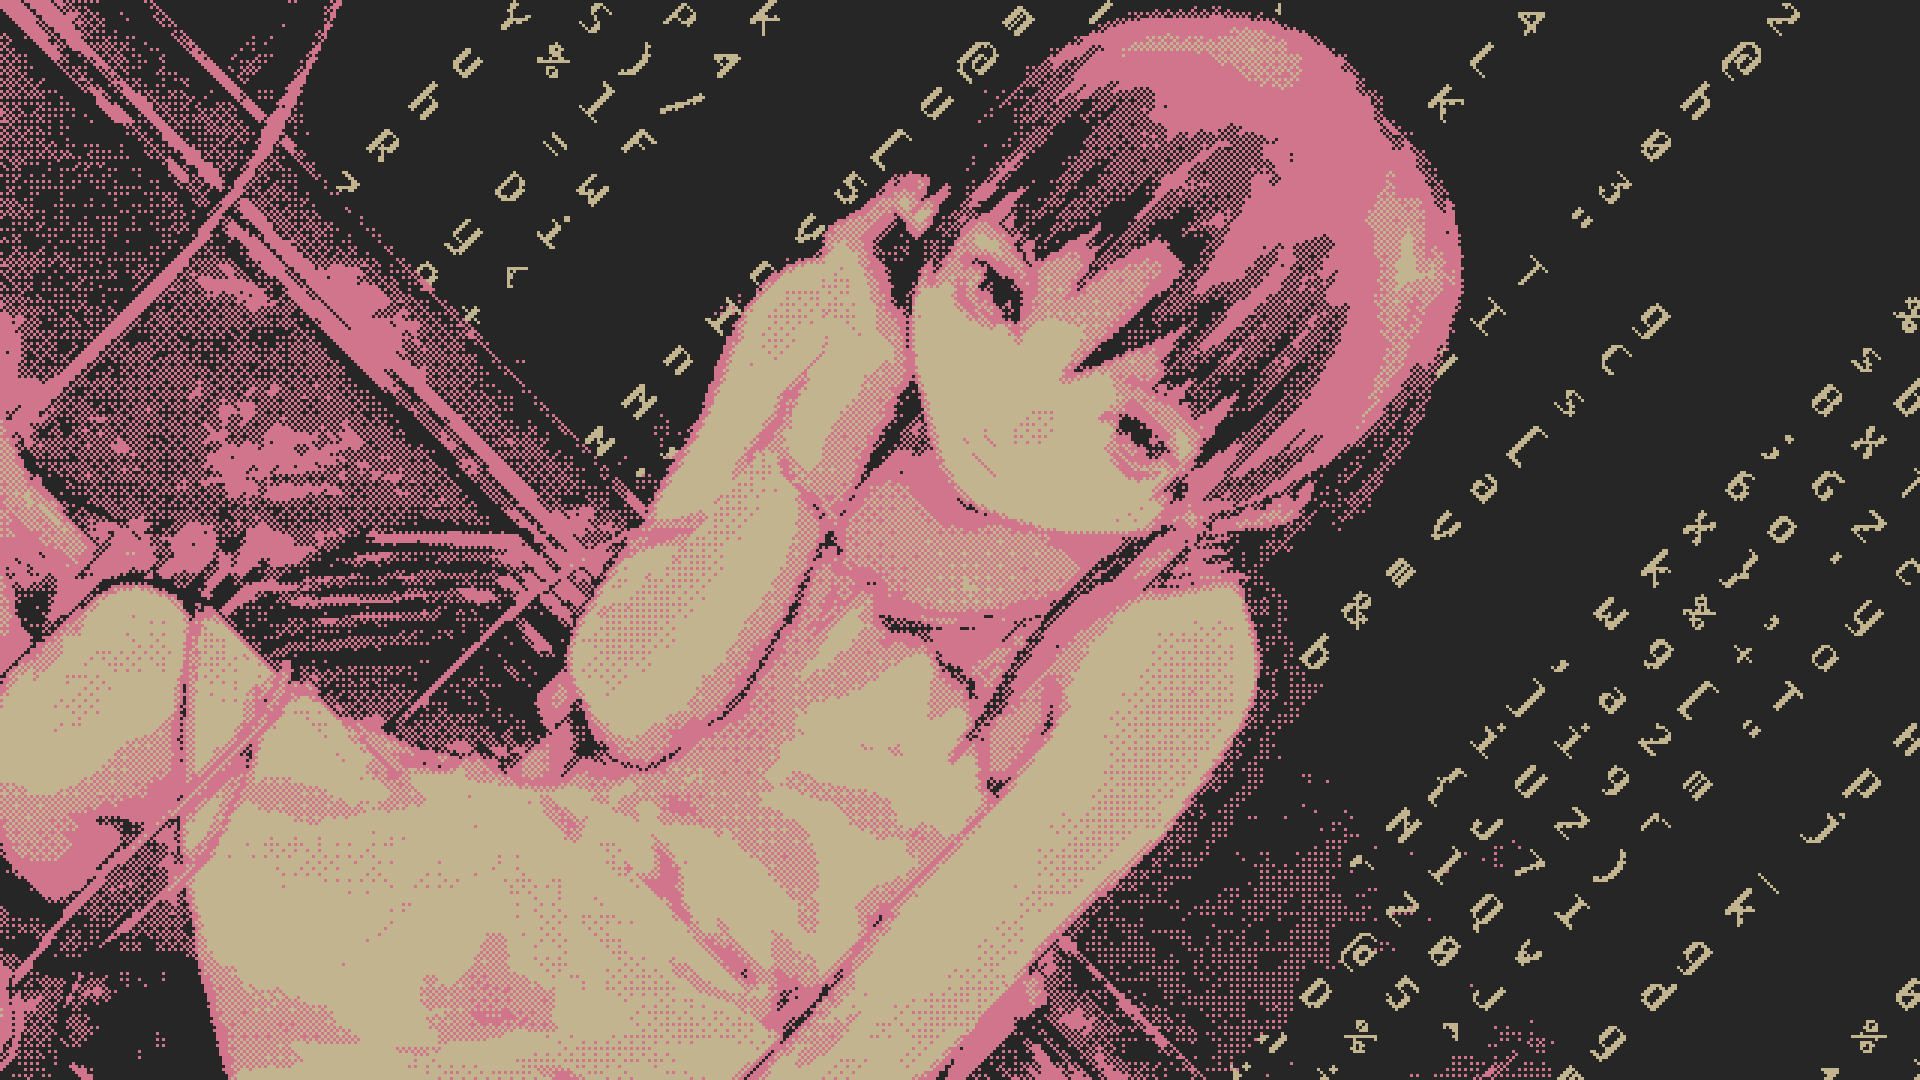 HD pixel art wallpaper featuring Lain Iwakura from the anime series Serial Experiments Lain, with a nostalgic retro feel.